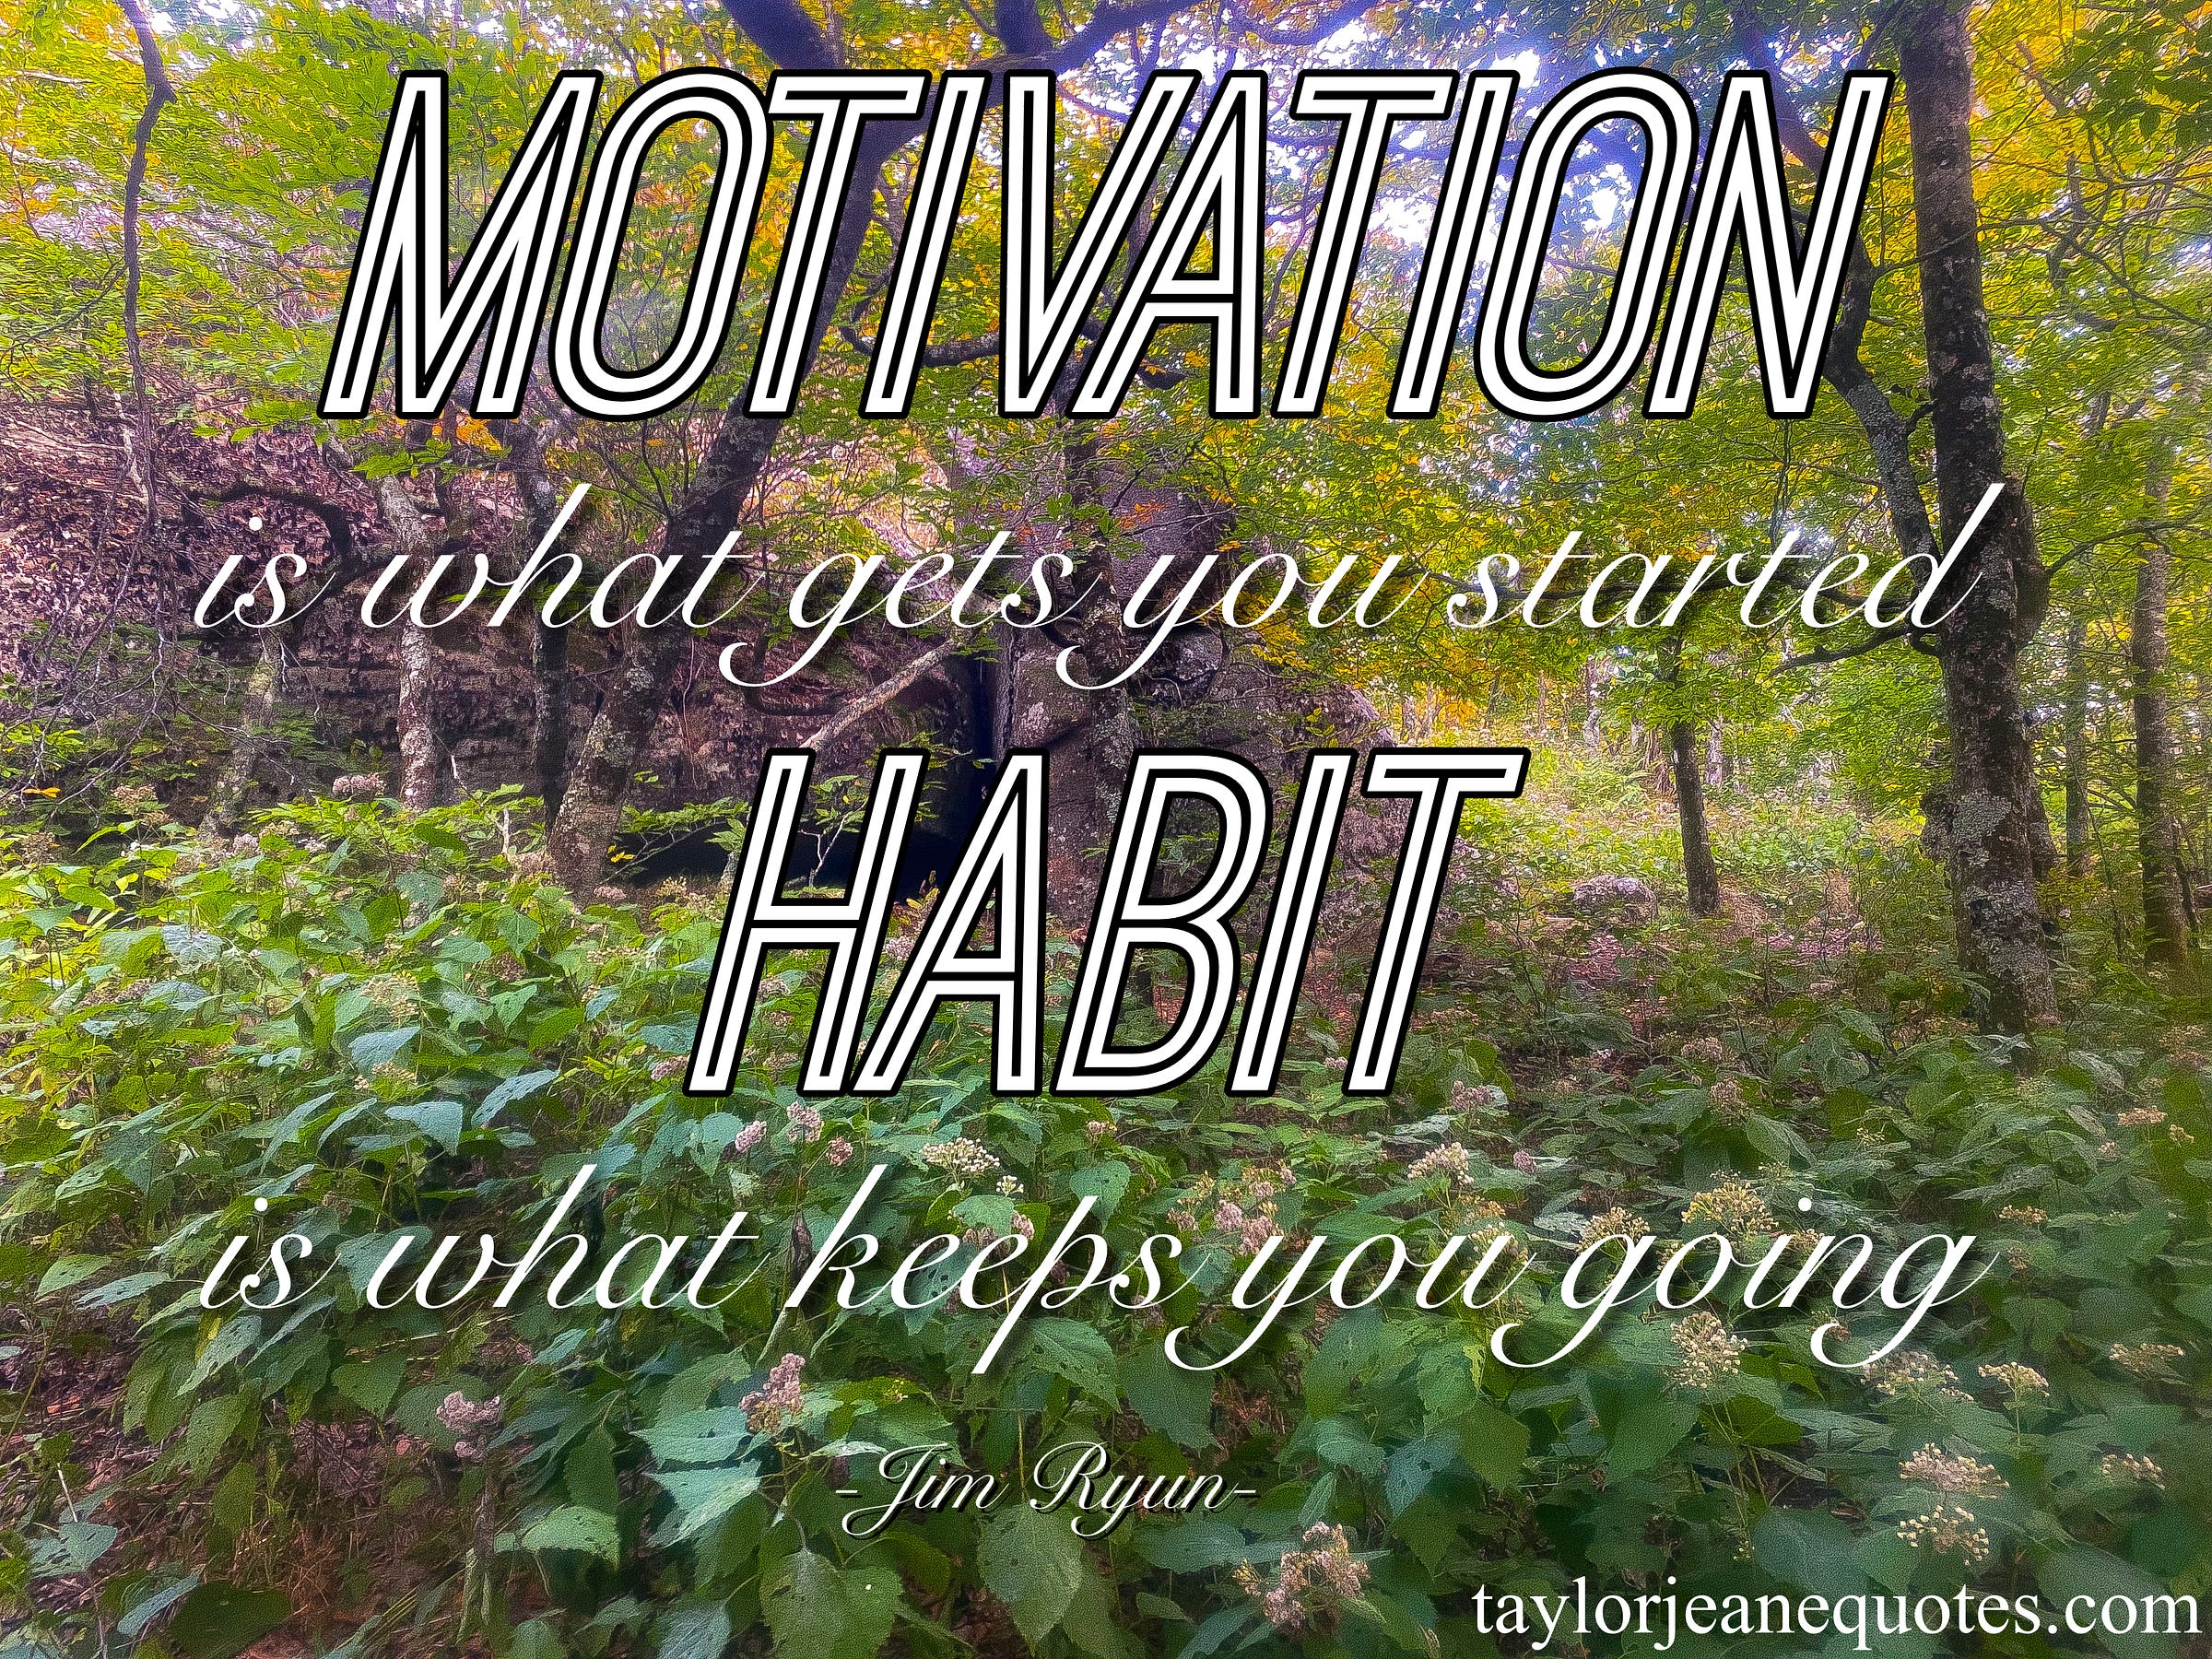 taylor jeane quotes, taylor jeane, taylor wilson, inspirational quotes, motivational quotes, habit quotes, jim ryun, jim ryun quotes, habits,  how to create habits, how to stick to habits, goal quotes, goal achievement quotes, north carolina, mountains, trees, free quote of the day subscription